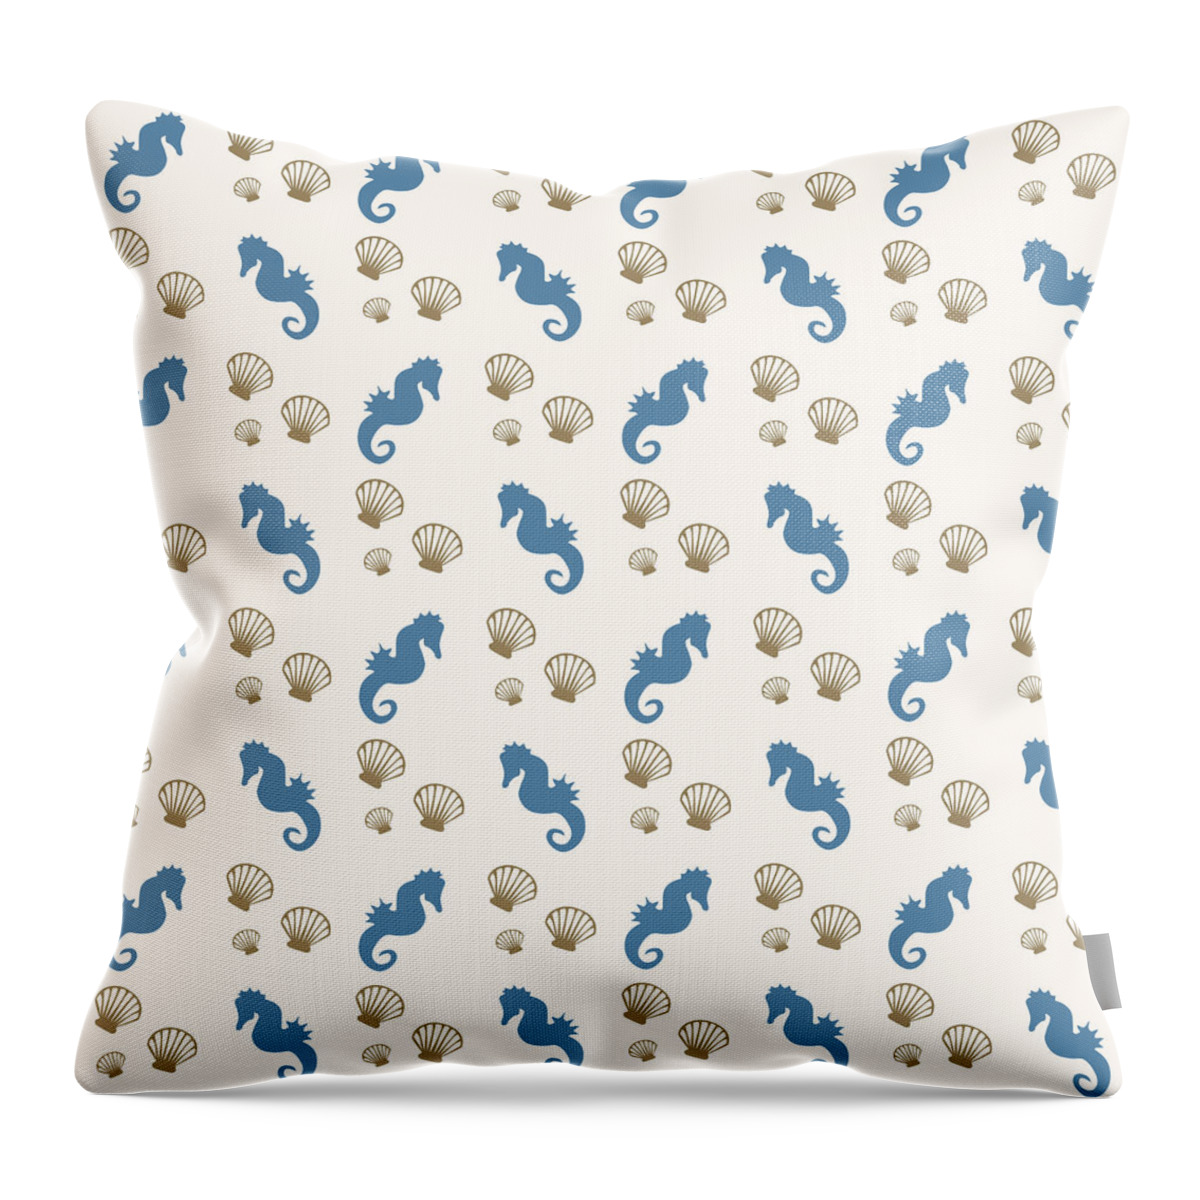 Seahorse Throw Pillow featuring the mixed media Seahorse and Shells Pattern by Christina Rollo